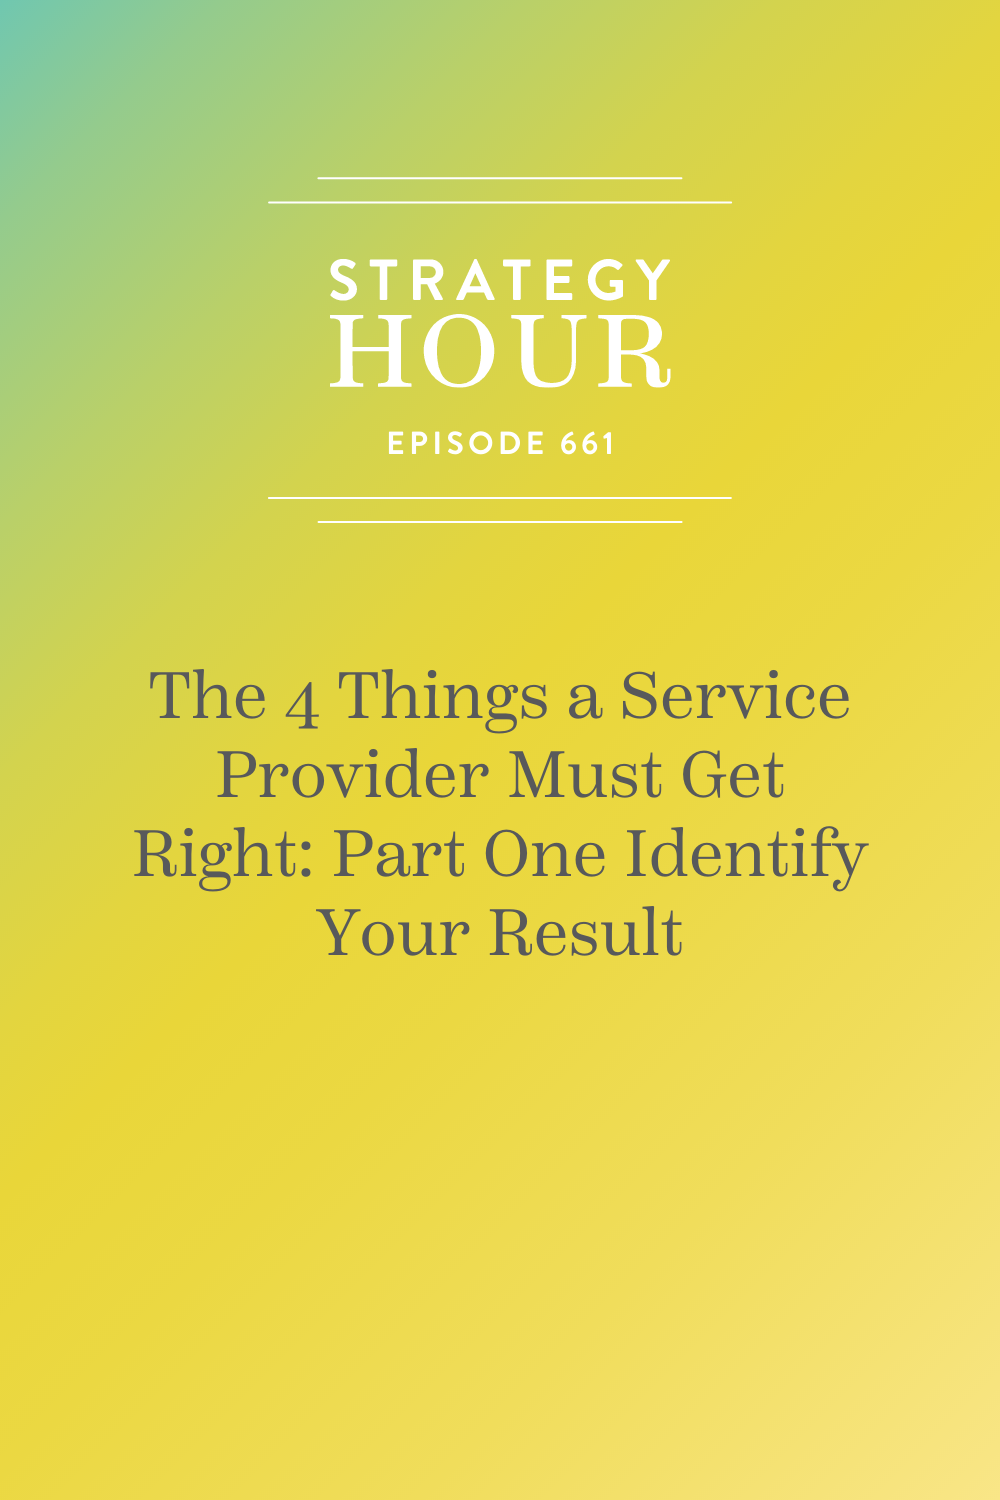 4-things-a-service-provider-must-get-right-part-one-identify-your